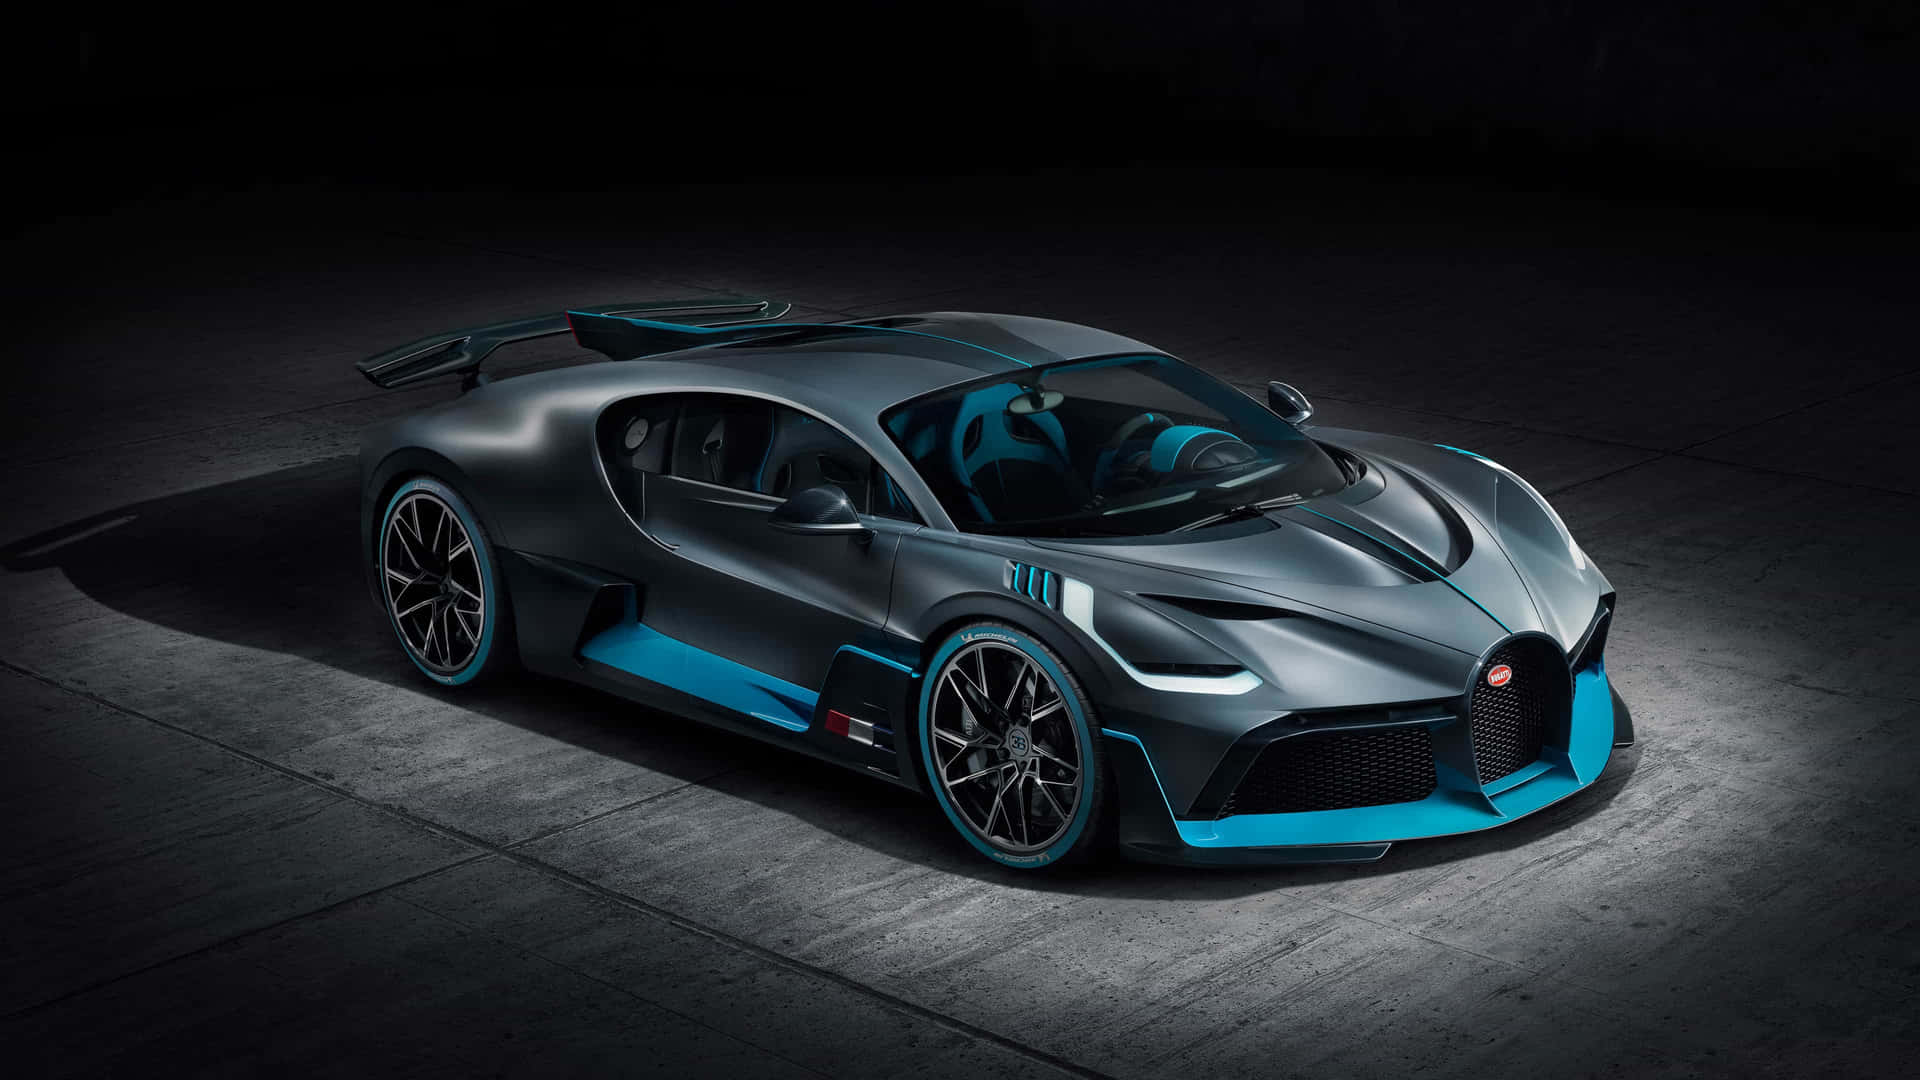 Best Bugatti, performance and style for the road